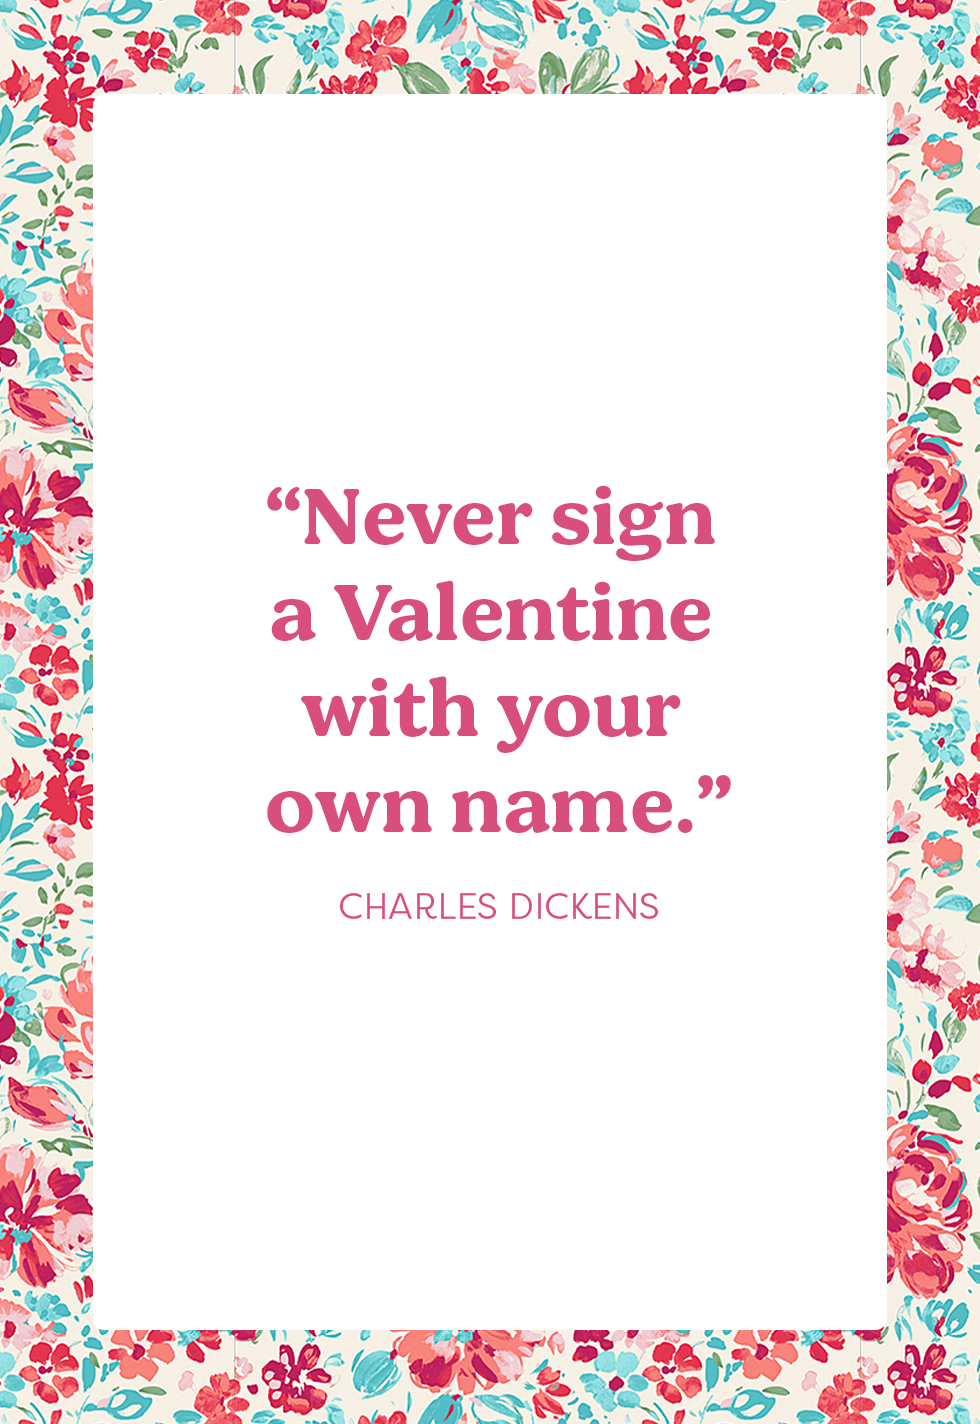 funny valentines day quotes 7 65afd0ad67c6a